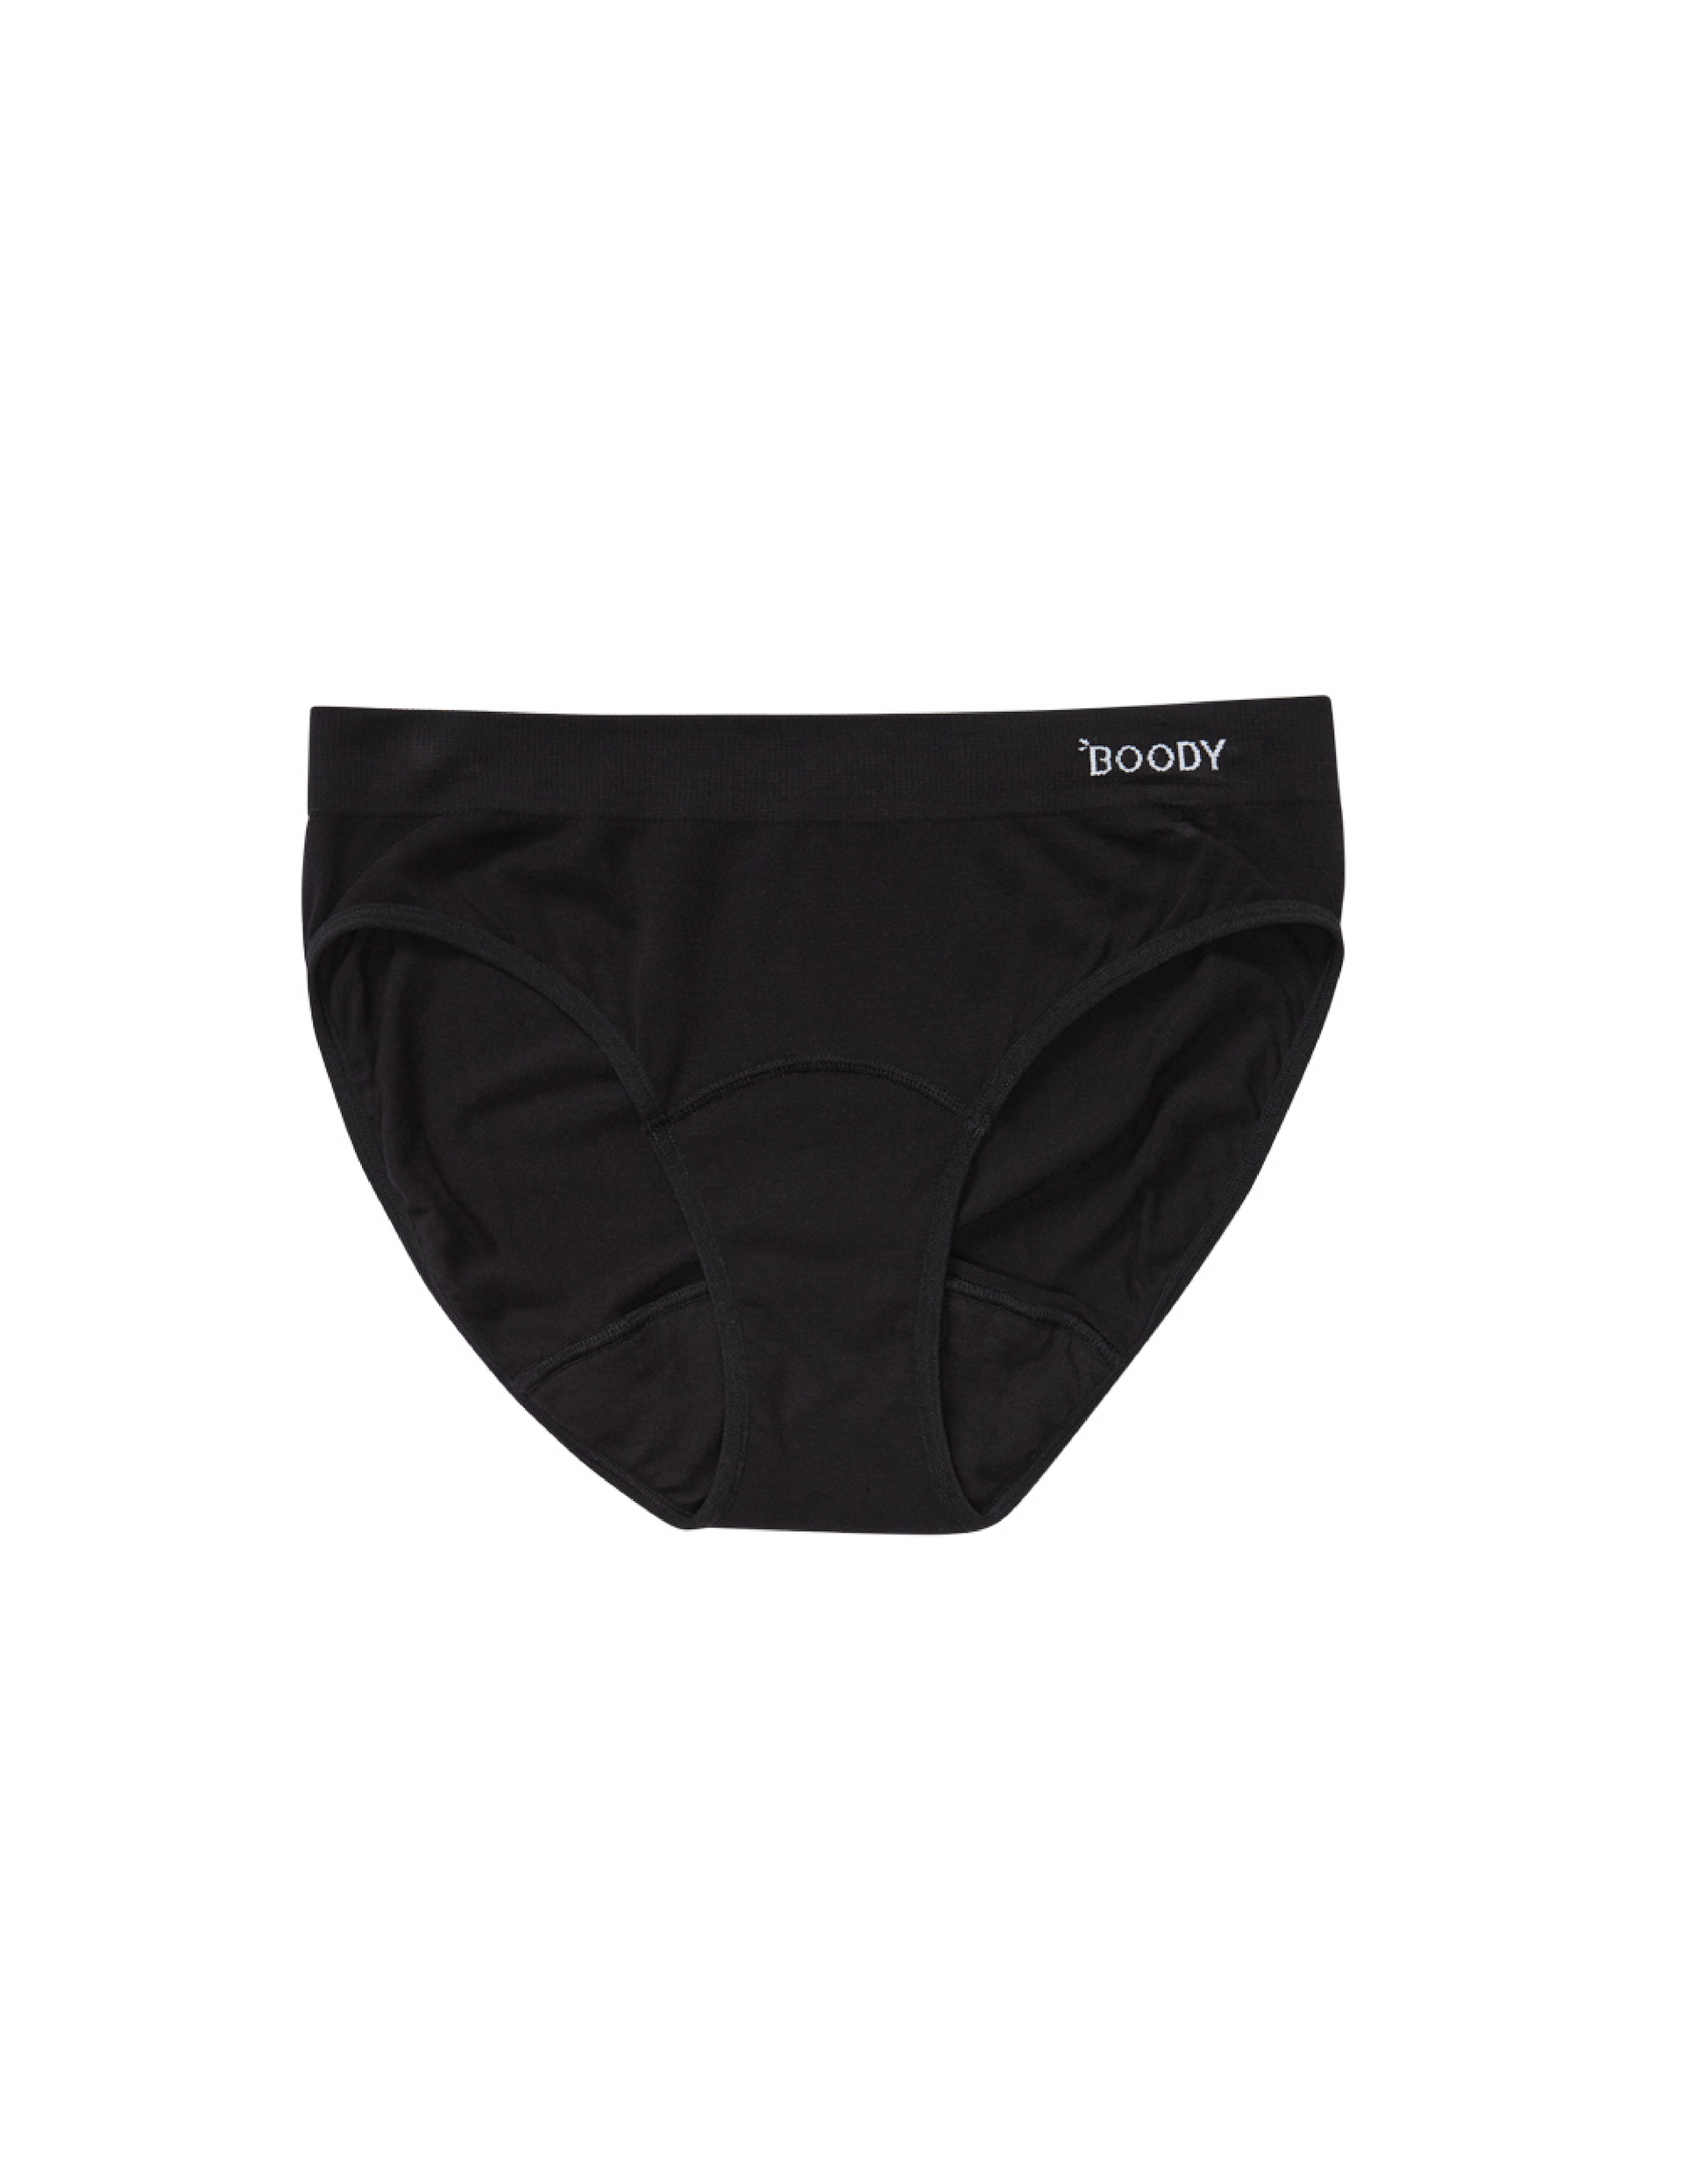 BOODY - PERIOD PANTS (LIGHT TO MODERATE)